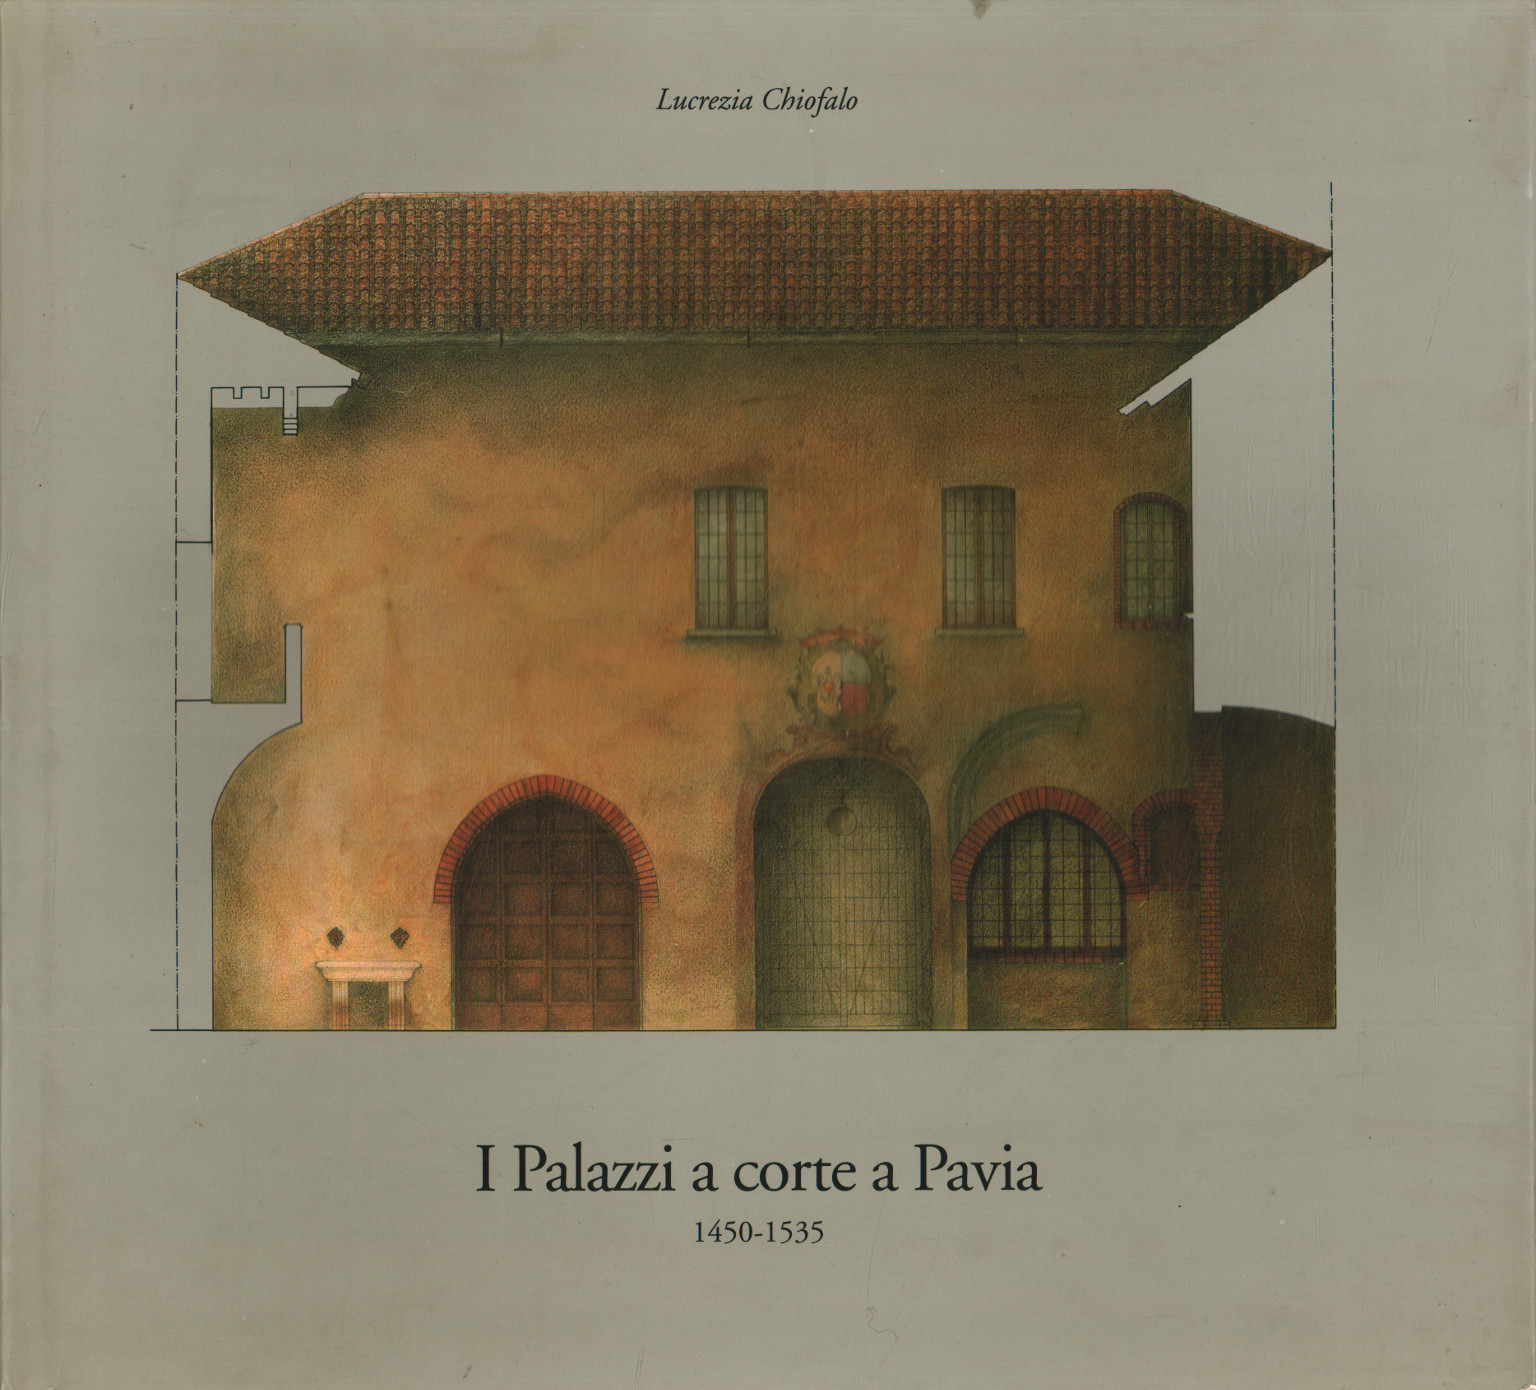 The court palaces in Pavia. 1450-1535